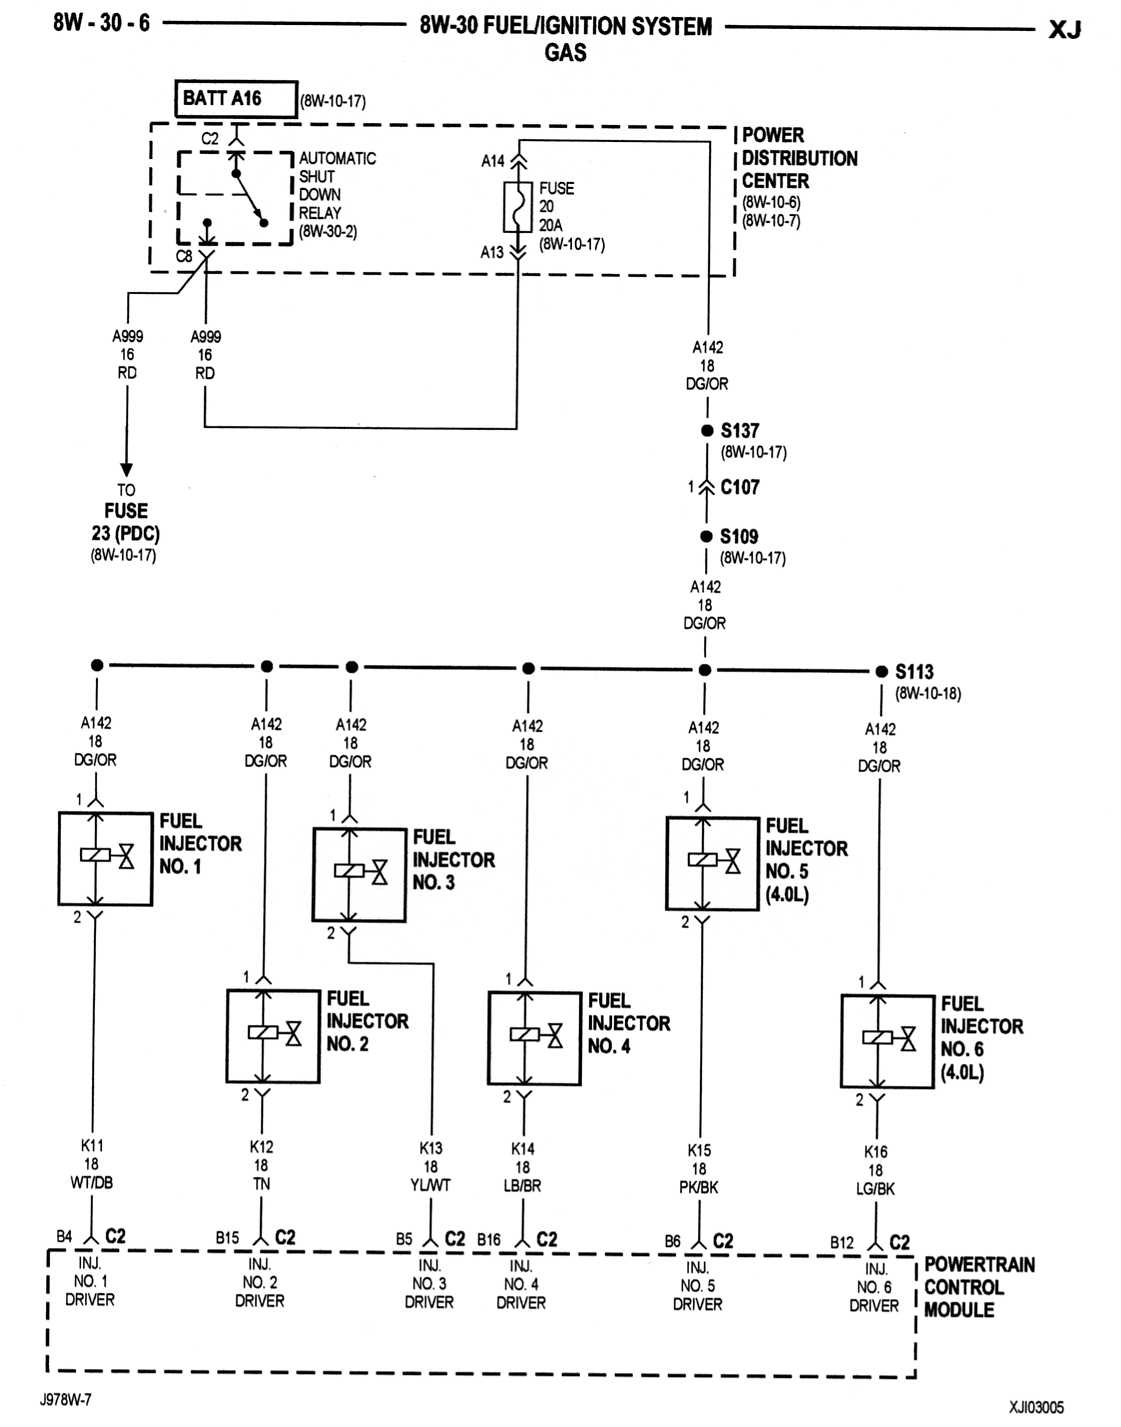 Fuel Injector Wiring Diagram Fuel Injector Wiring Harness Diagram Get Free Image About Wiring